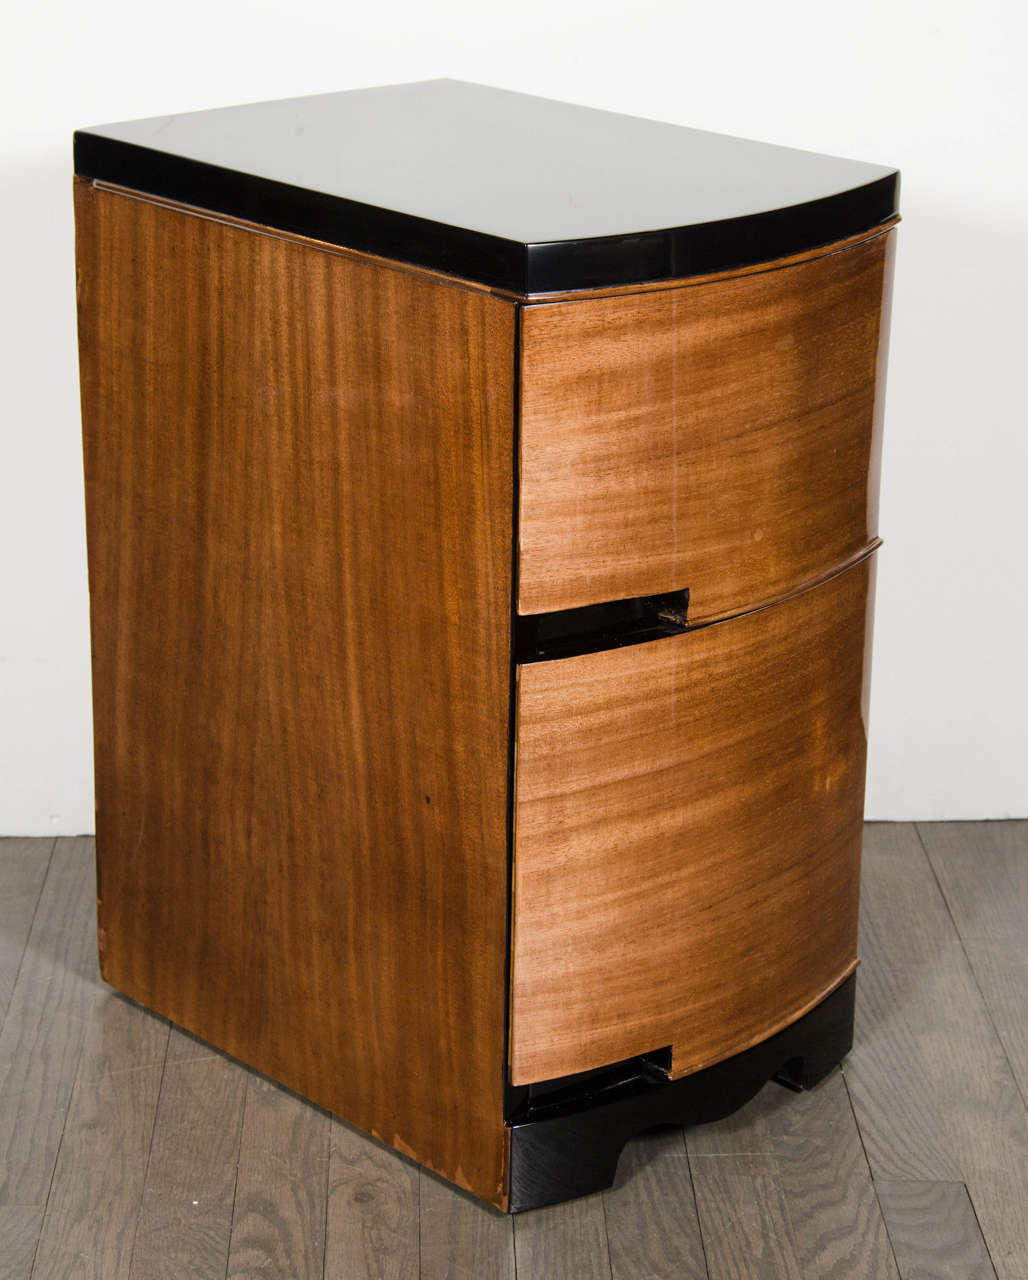 This pair of streamlined machine age Art Deco nightstands feature a bow fronted design in mahogany, two drawers groove pulls, the top and base are finished in black lacquer, and the base features a cut-out design. Restored to mint condition.